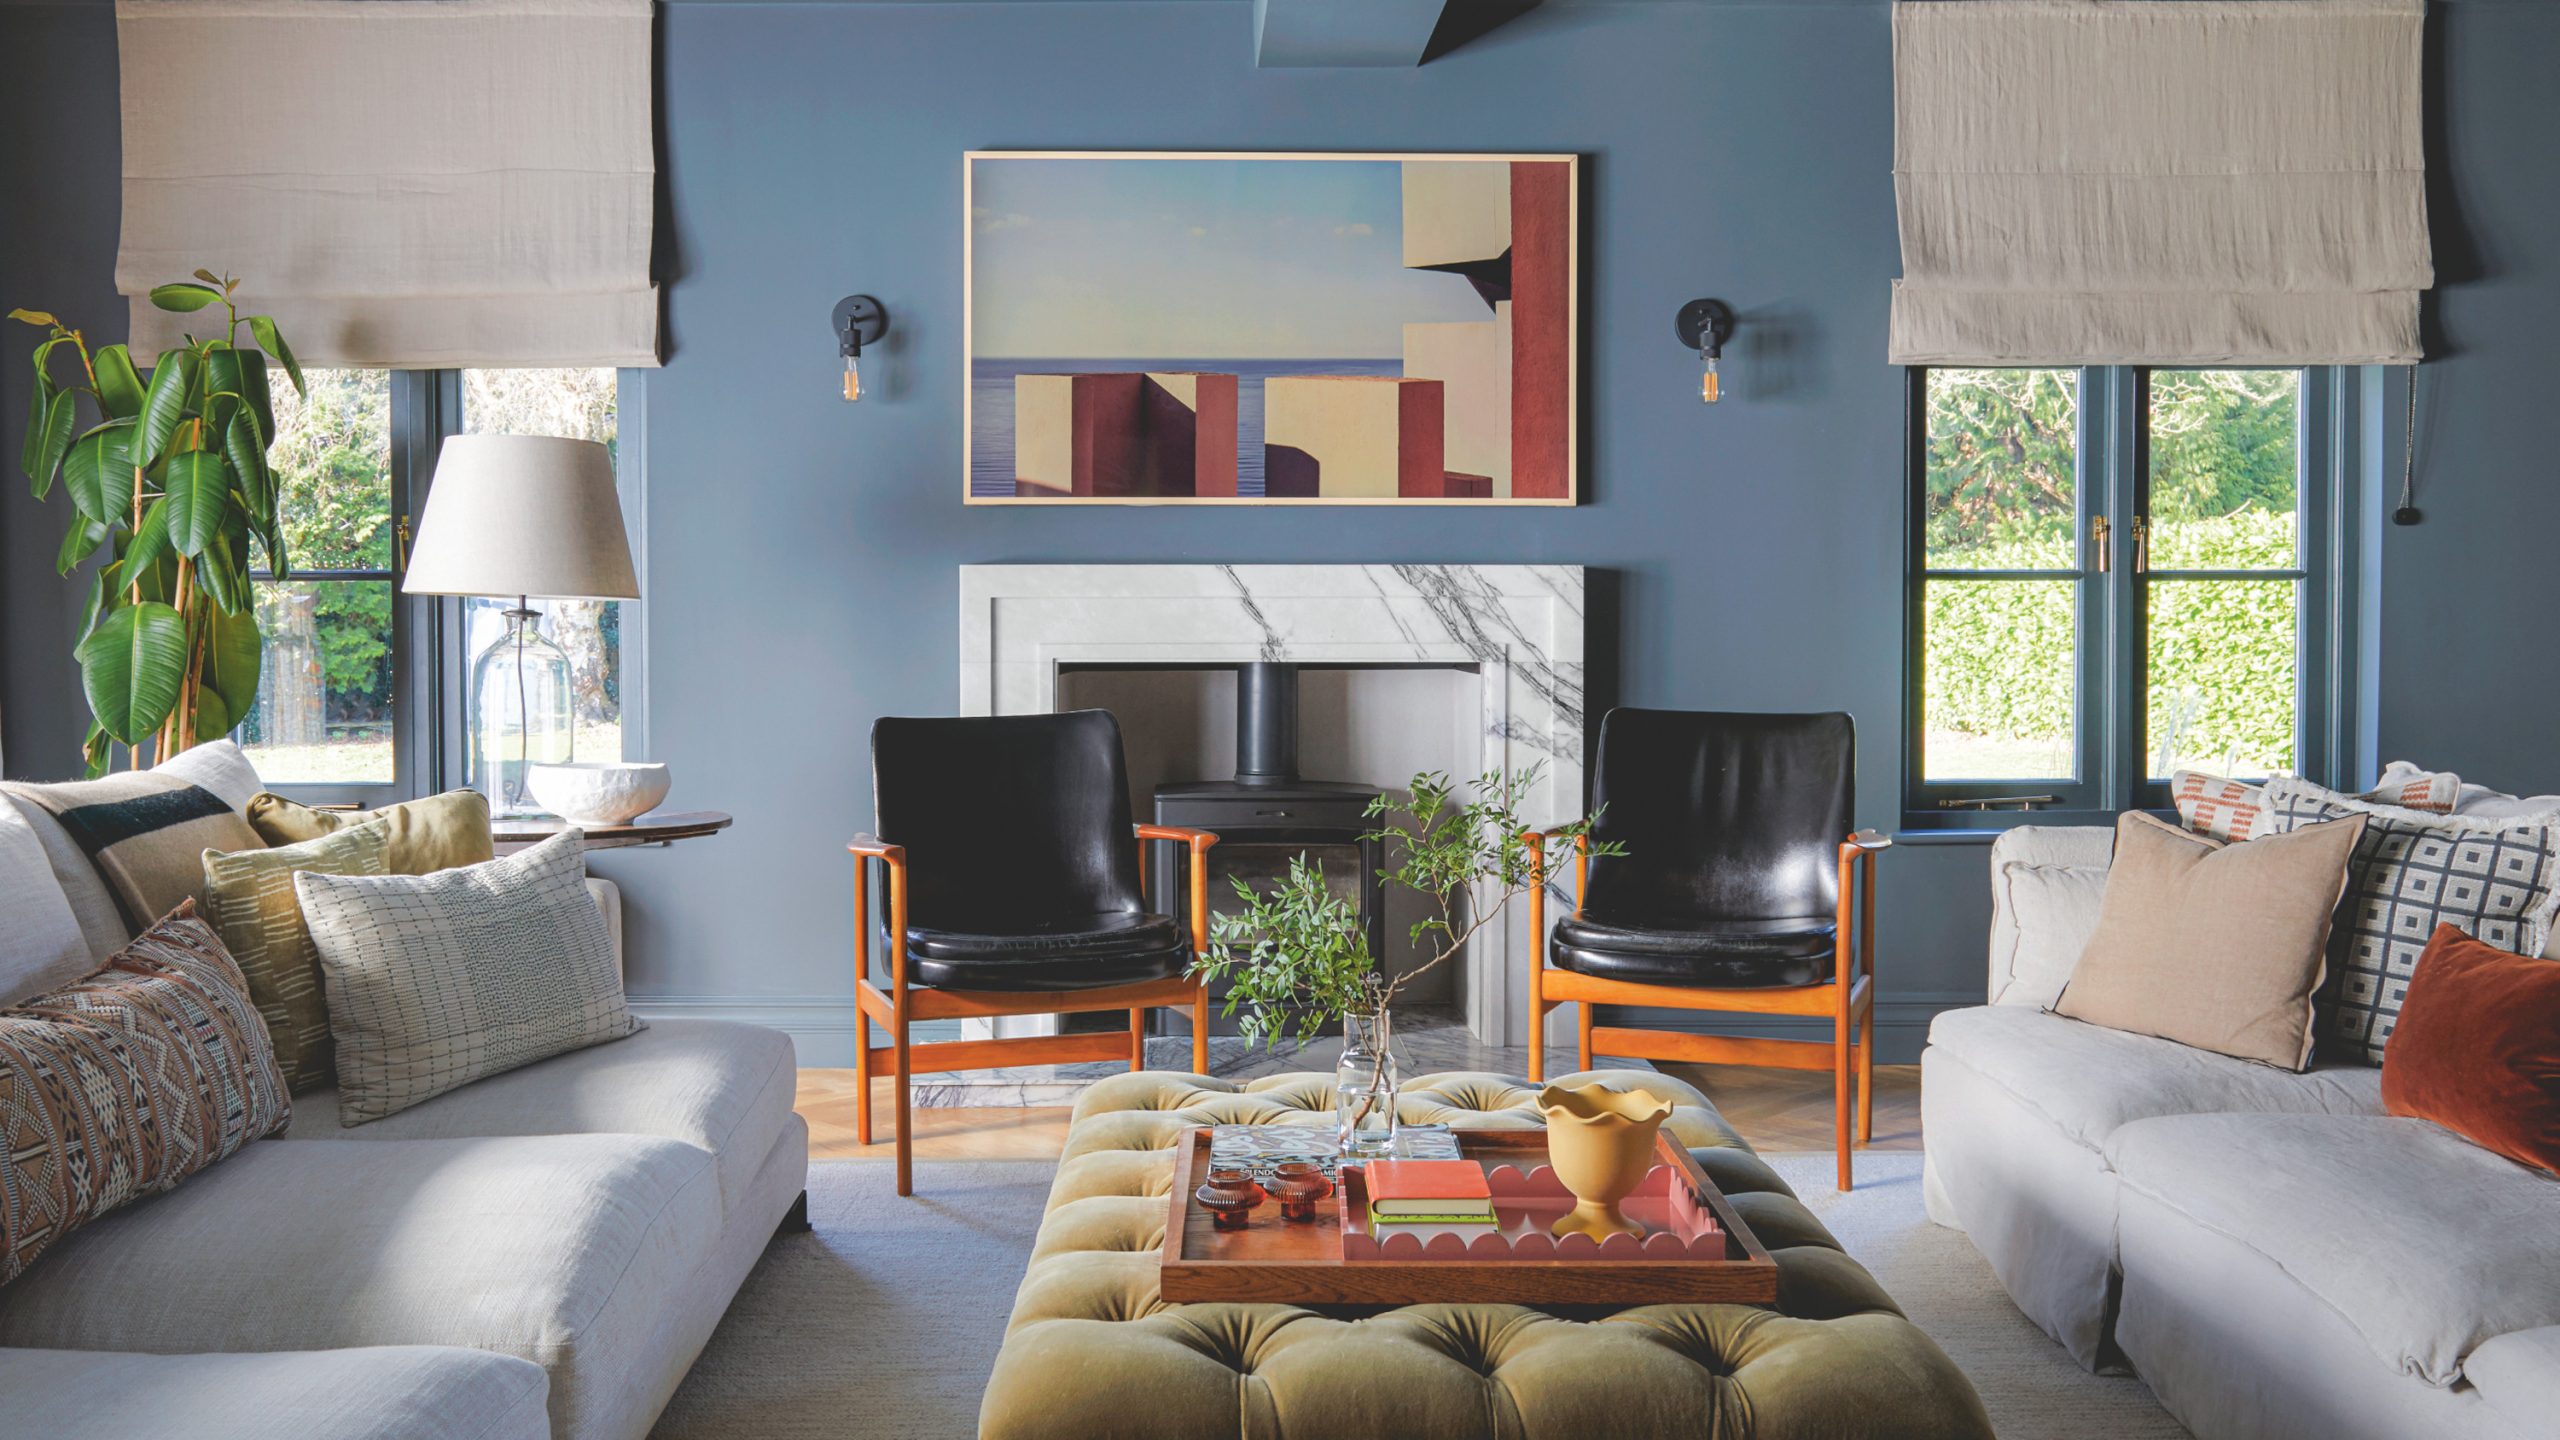 Choosing a Color Scheme for Your Living Room